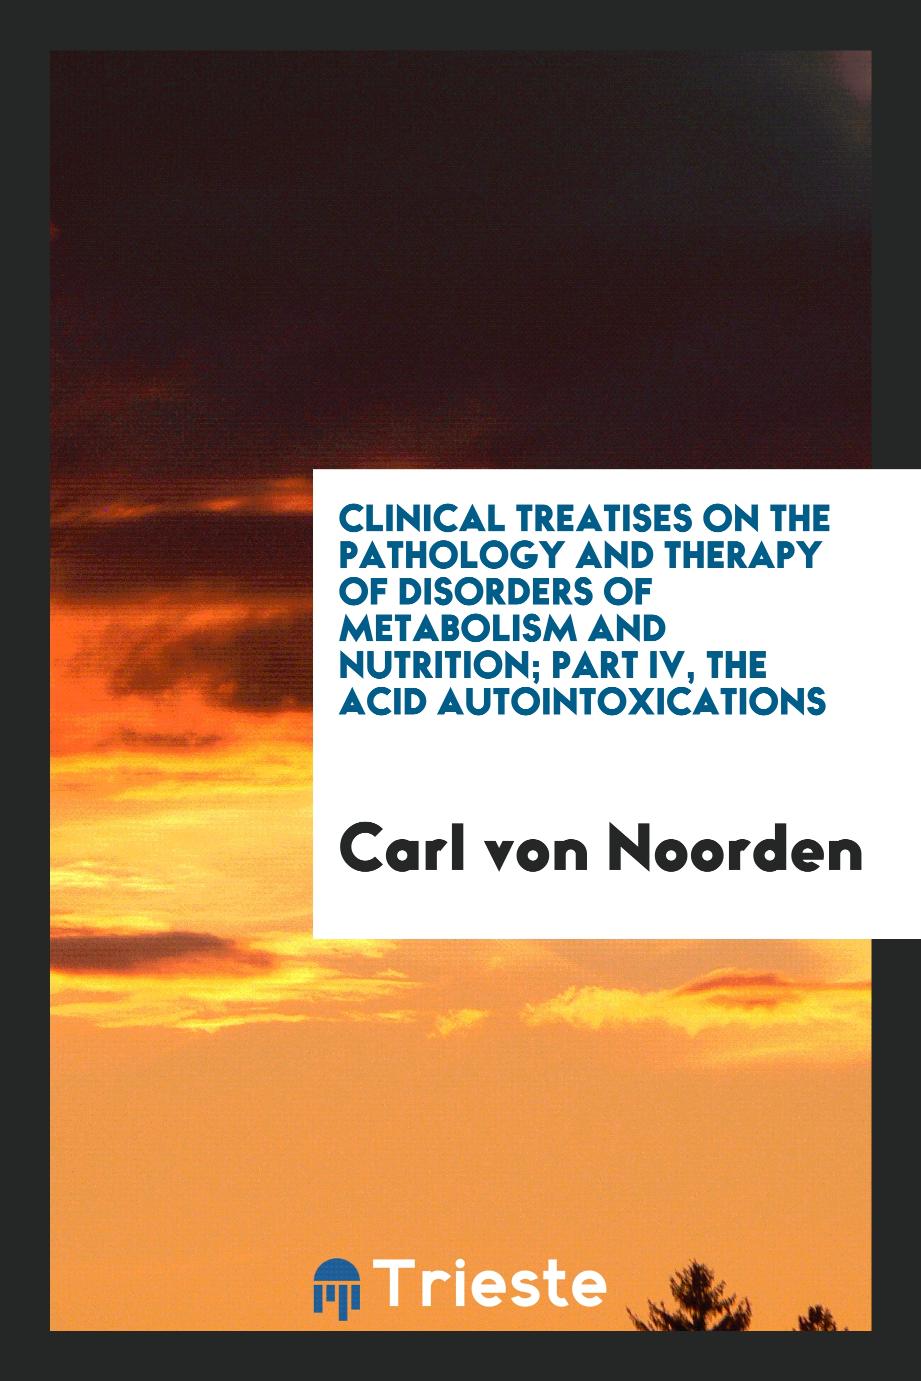 Clinical treatises on the pathology and therapy of disorders of metabolism and nutrition; part IV, The Acid Autointoxications